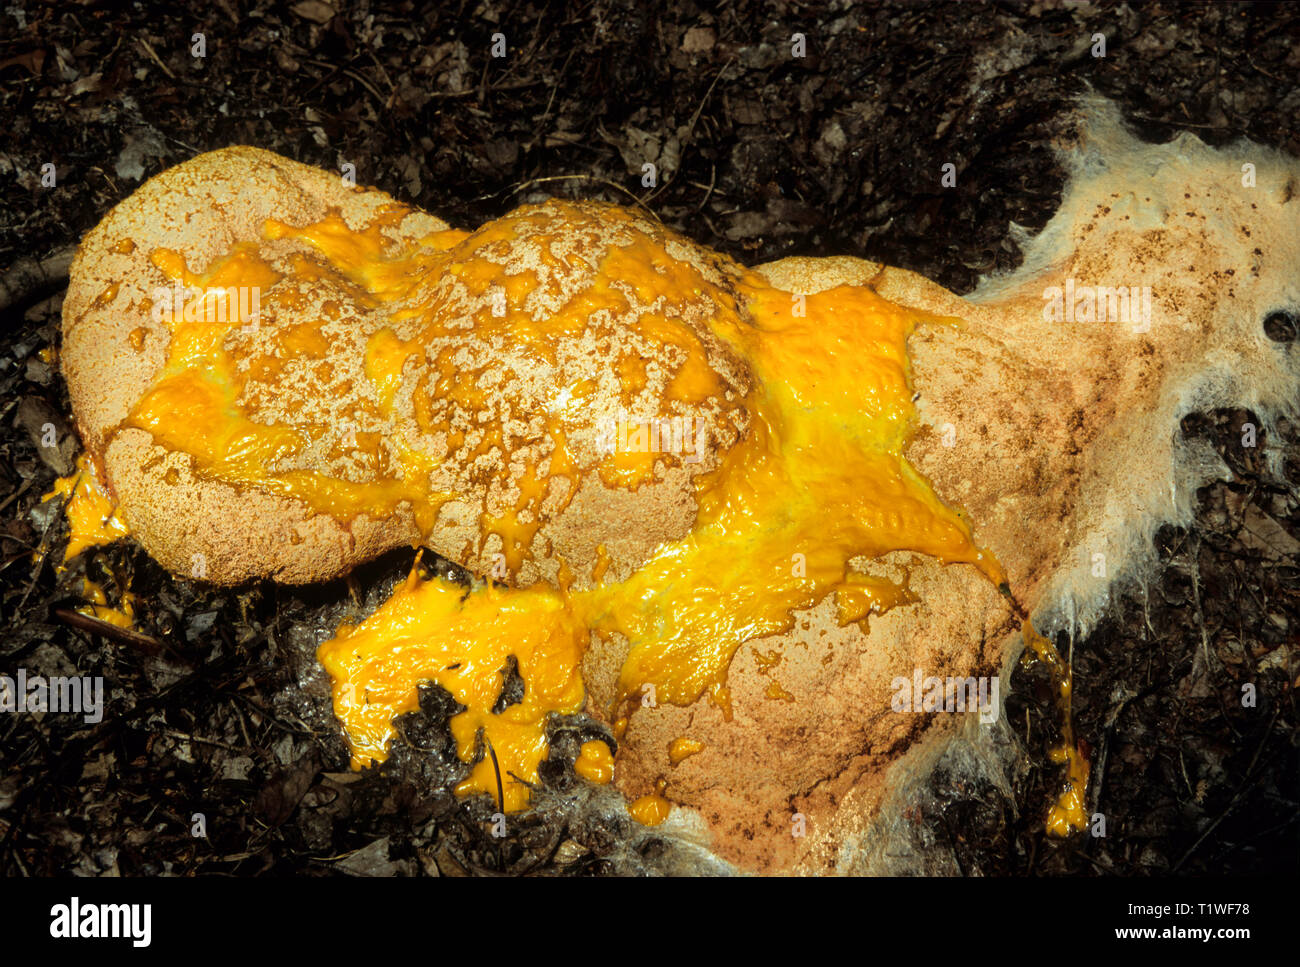 Scrambled-egg slime mold (Fuligo septica) growing on leaf mulch. Will become black with age and give off millions dark, purplish spores. (See accompan Stock Photo